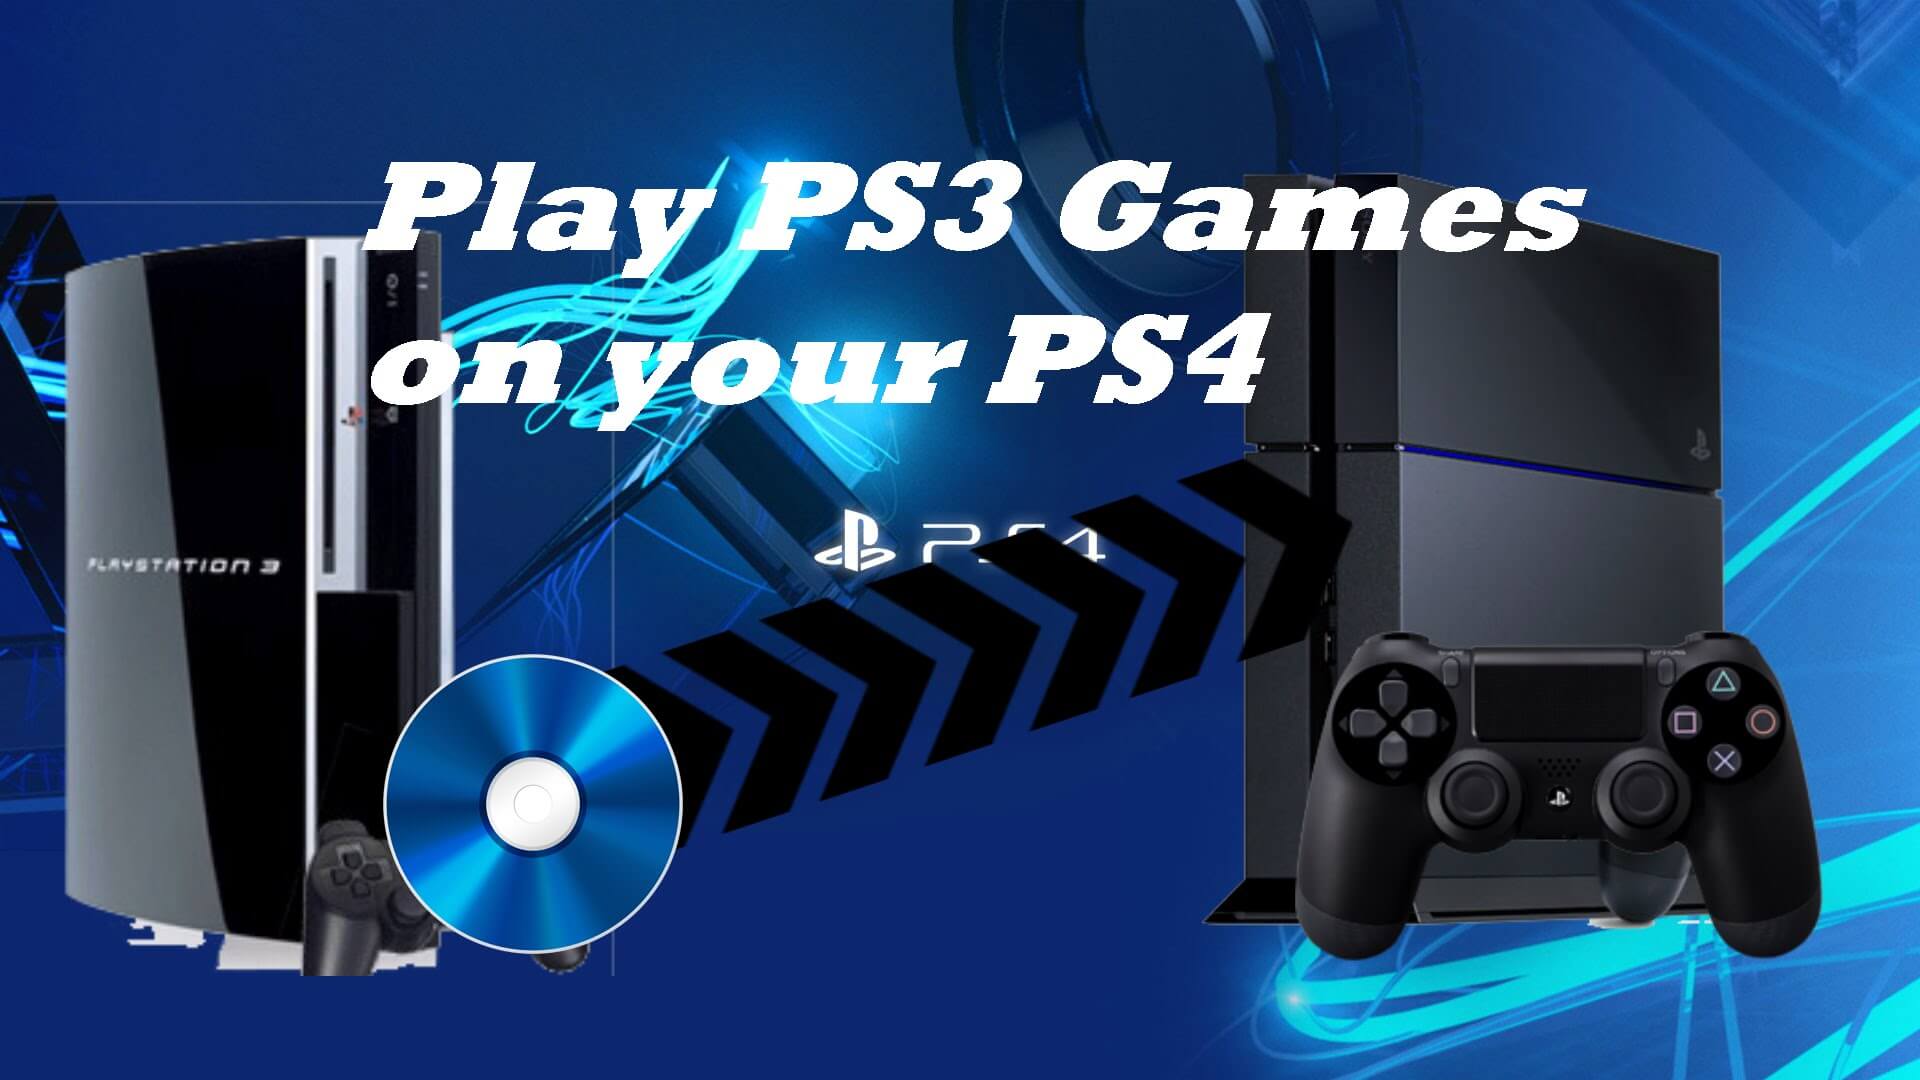 can you put a ps3 game in ps4